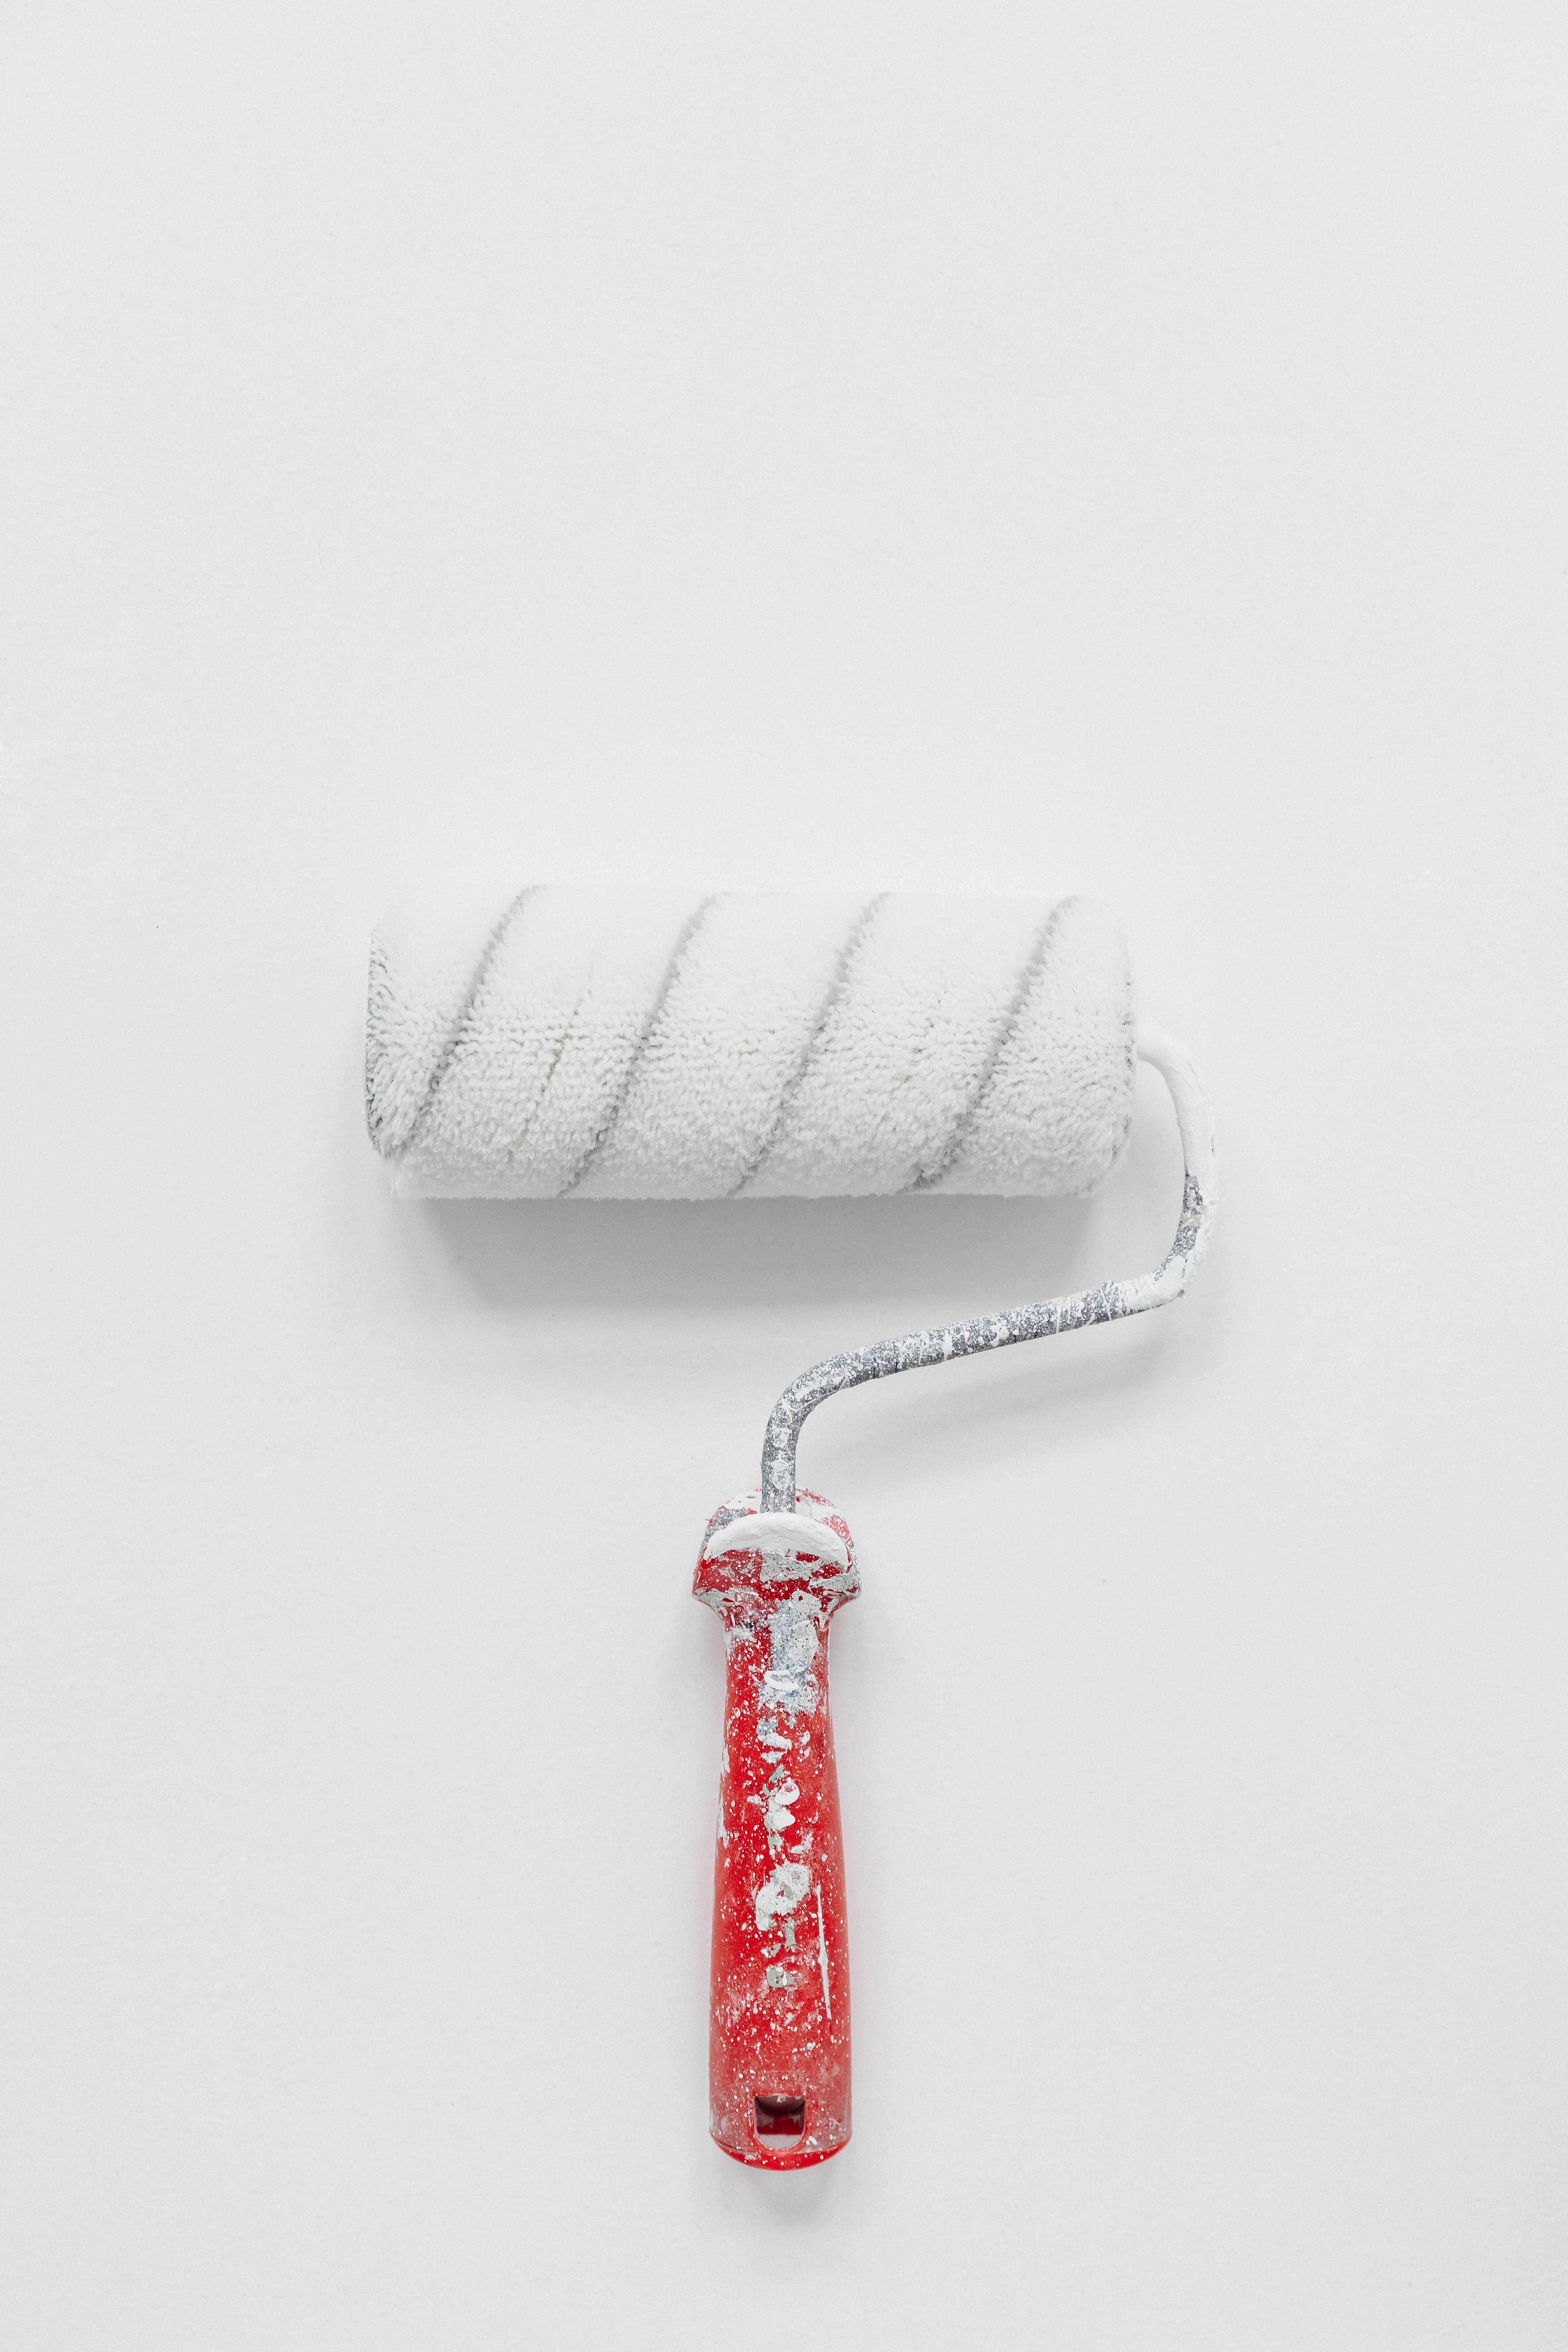 white paintbrush with red handle